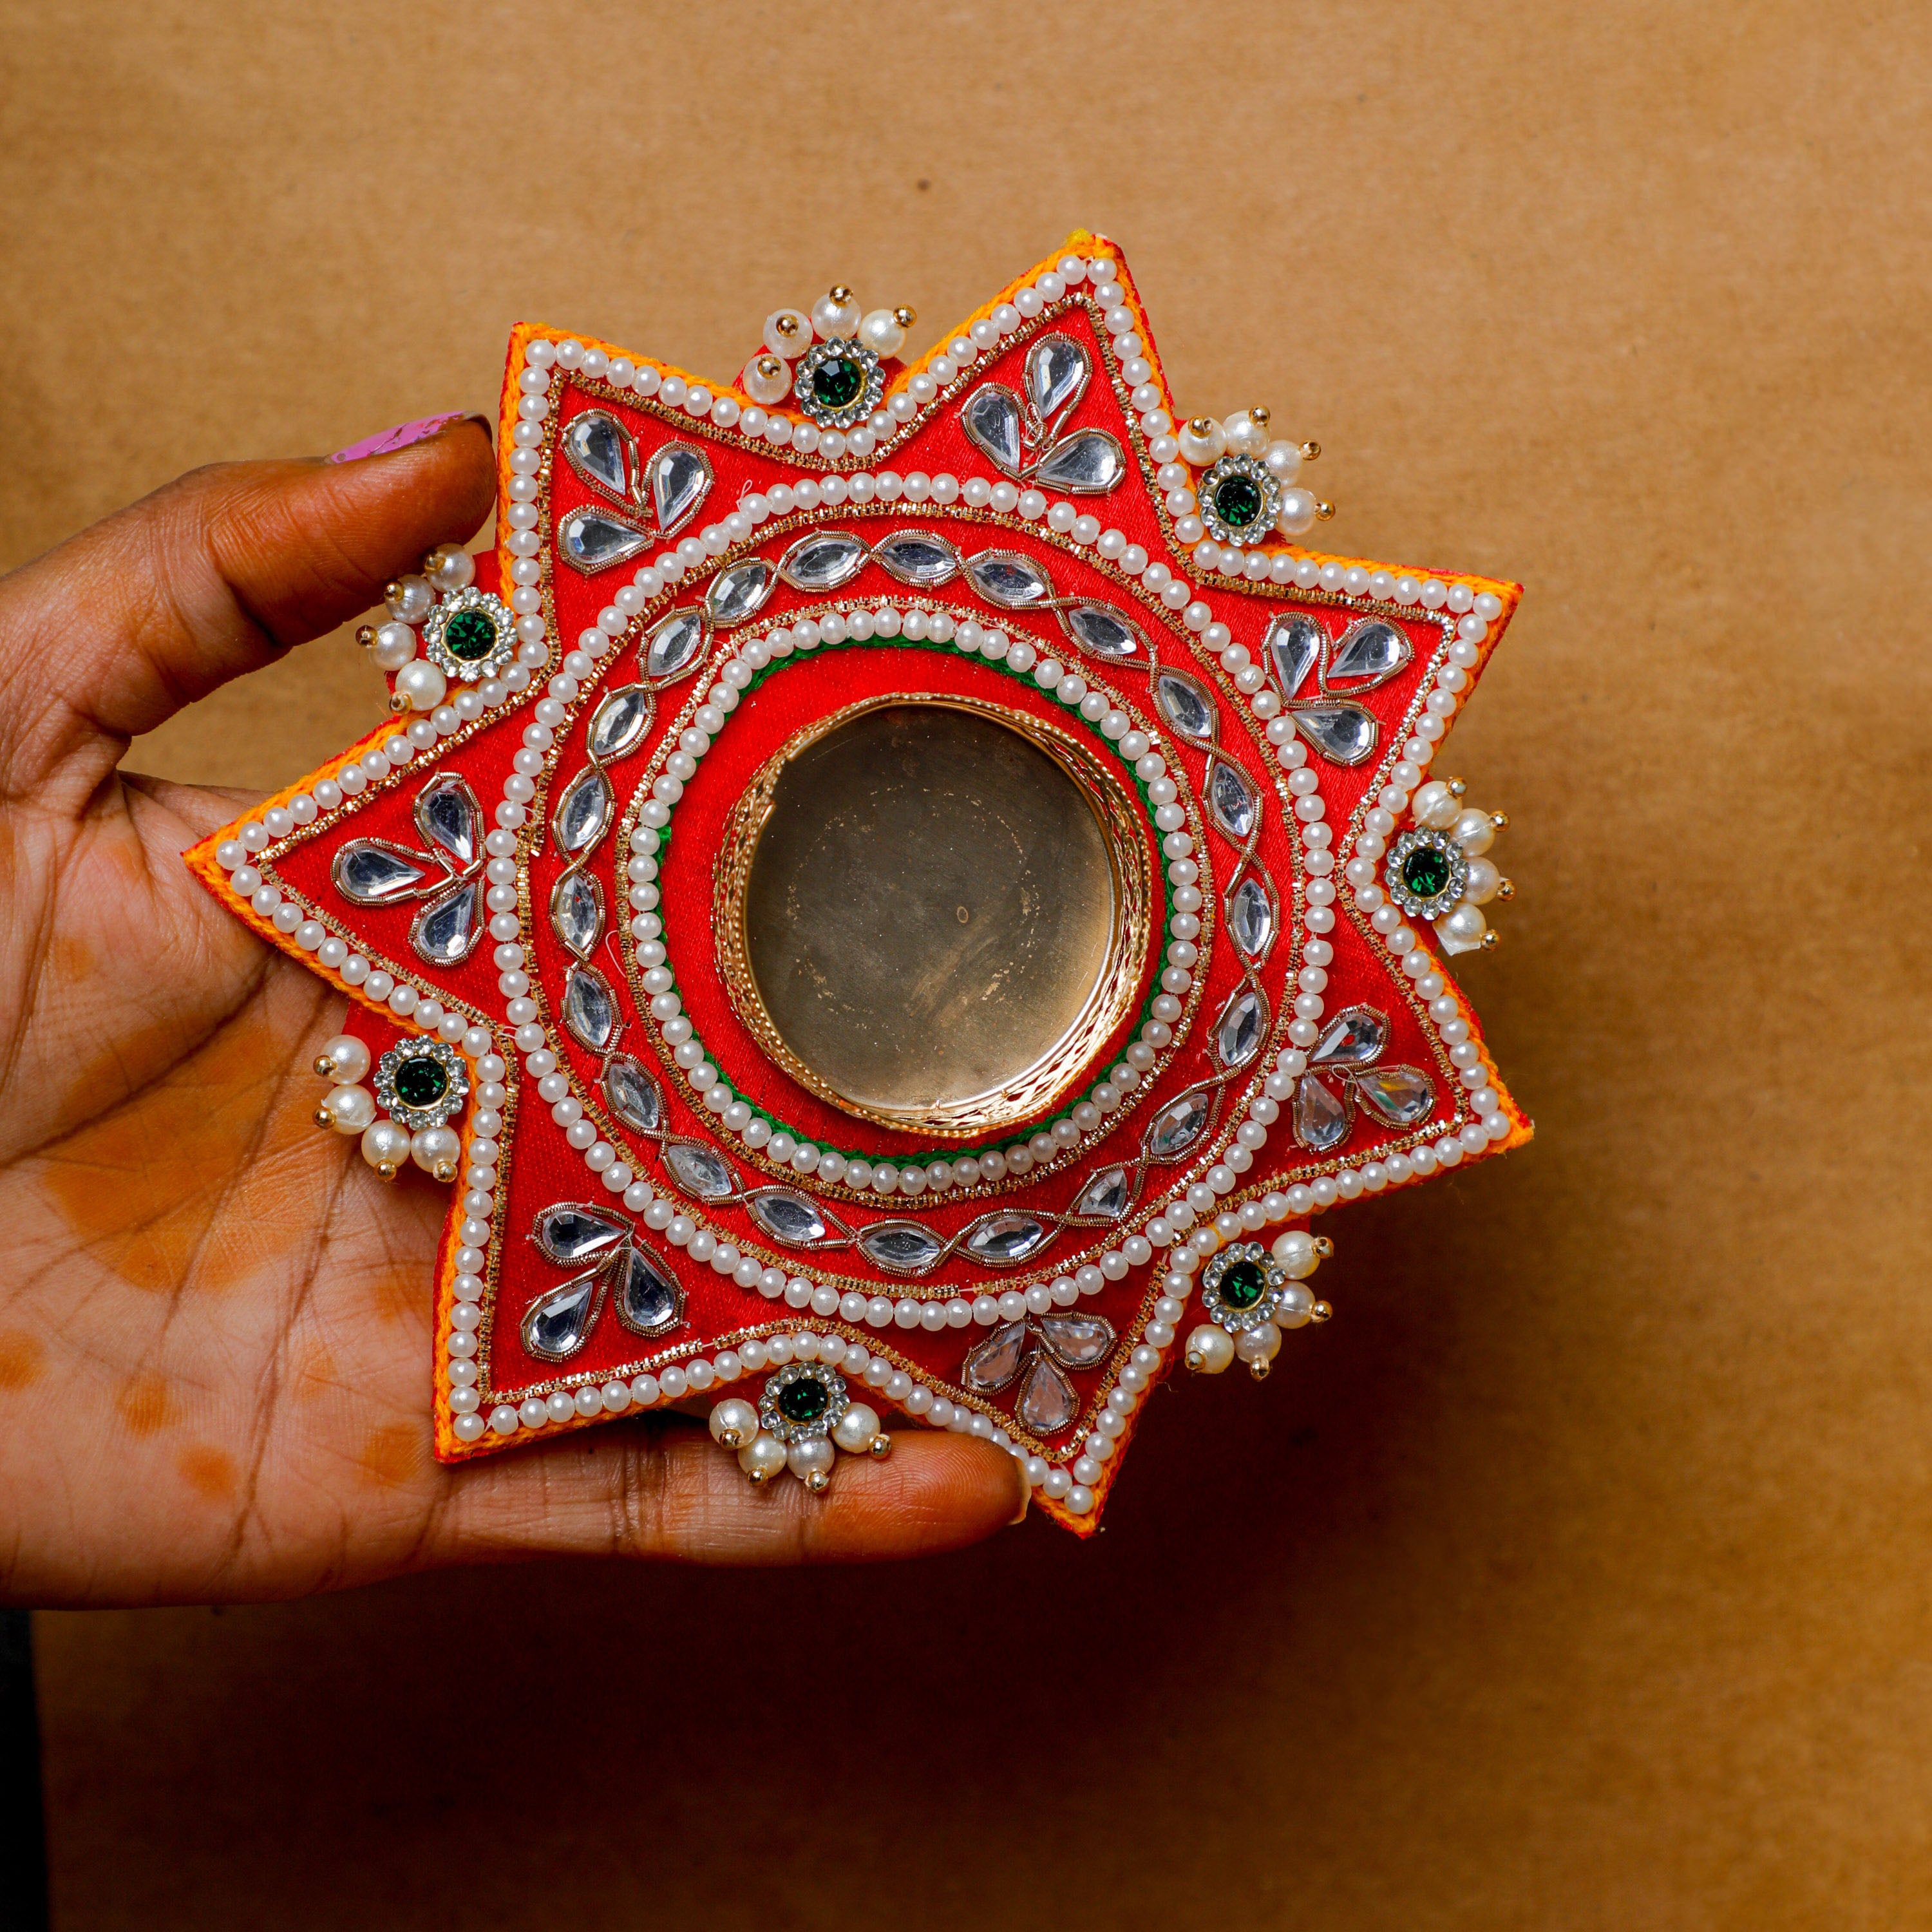  this diya ensures durability and timeless beauty